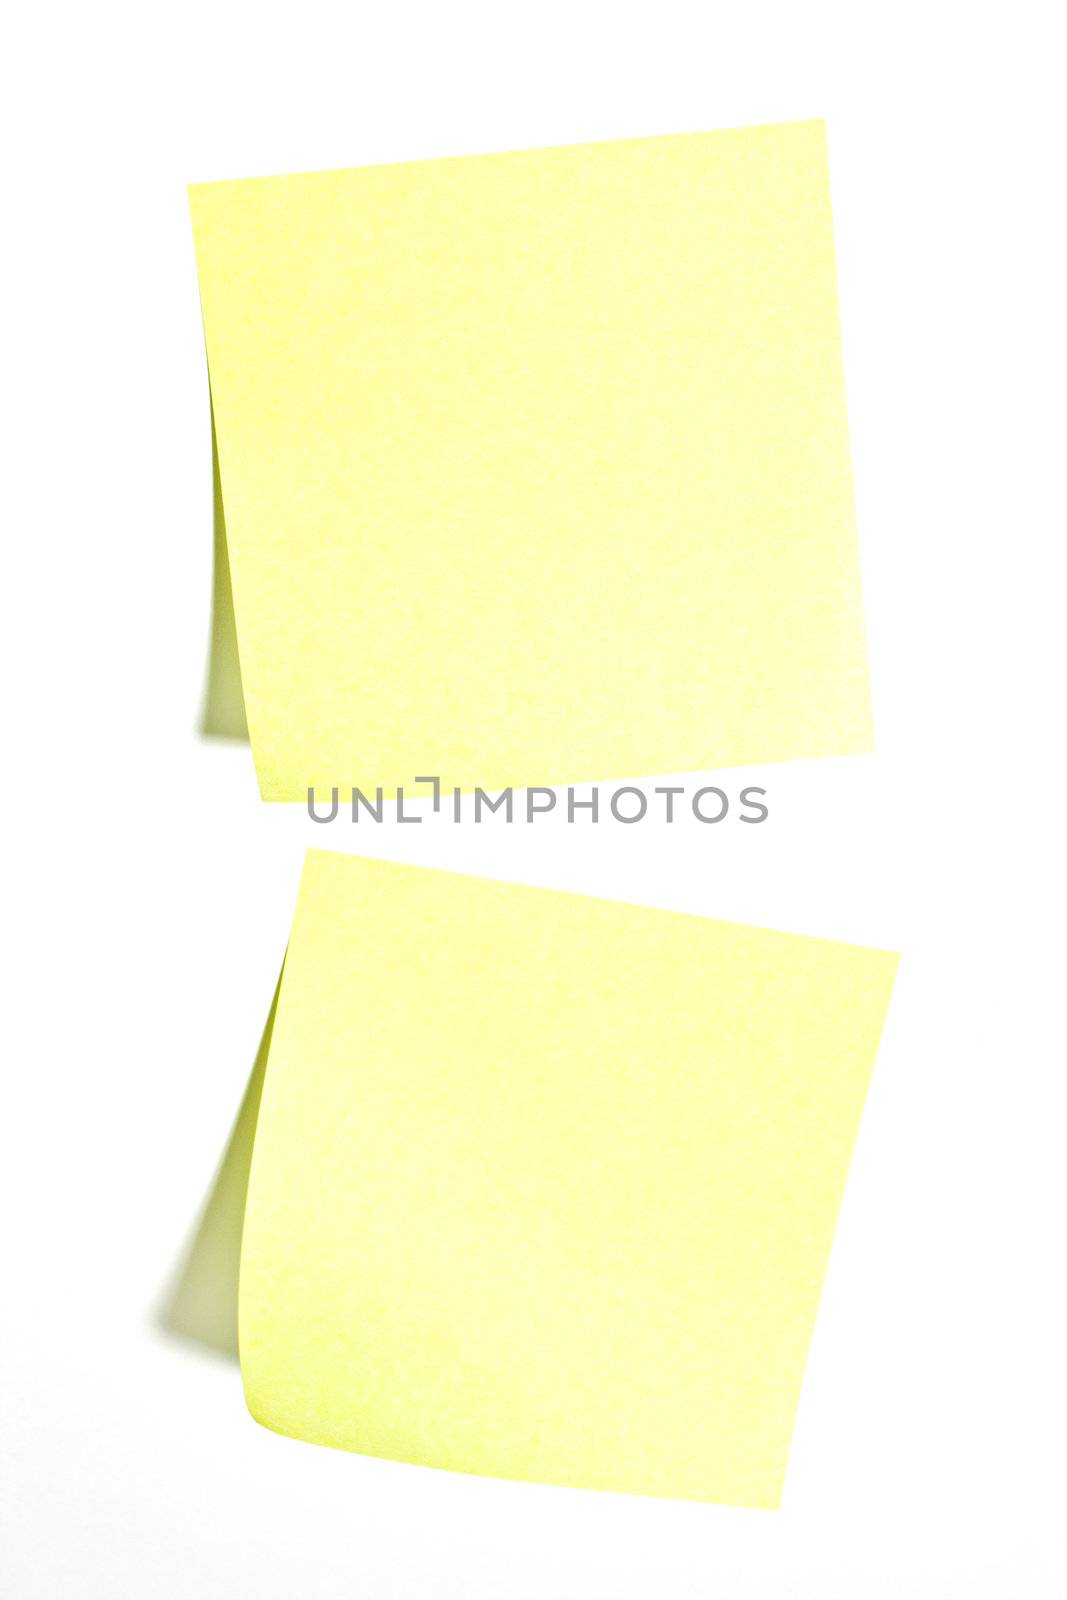 Two yellow sticky paper notes on a white background.
